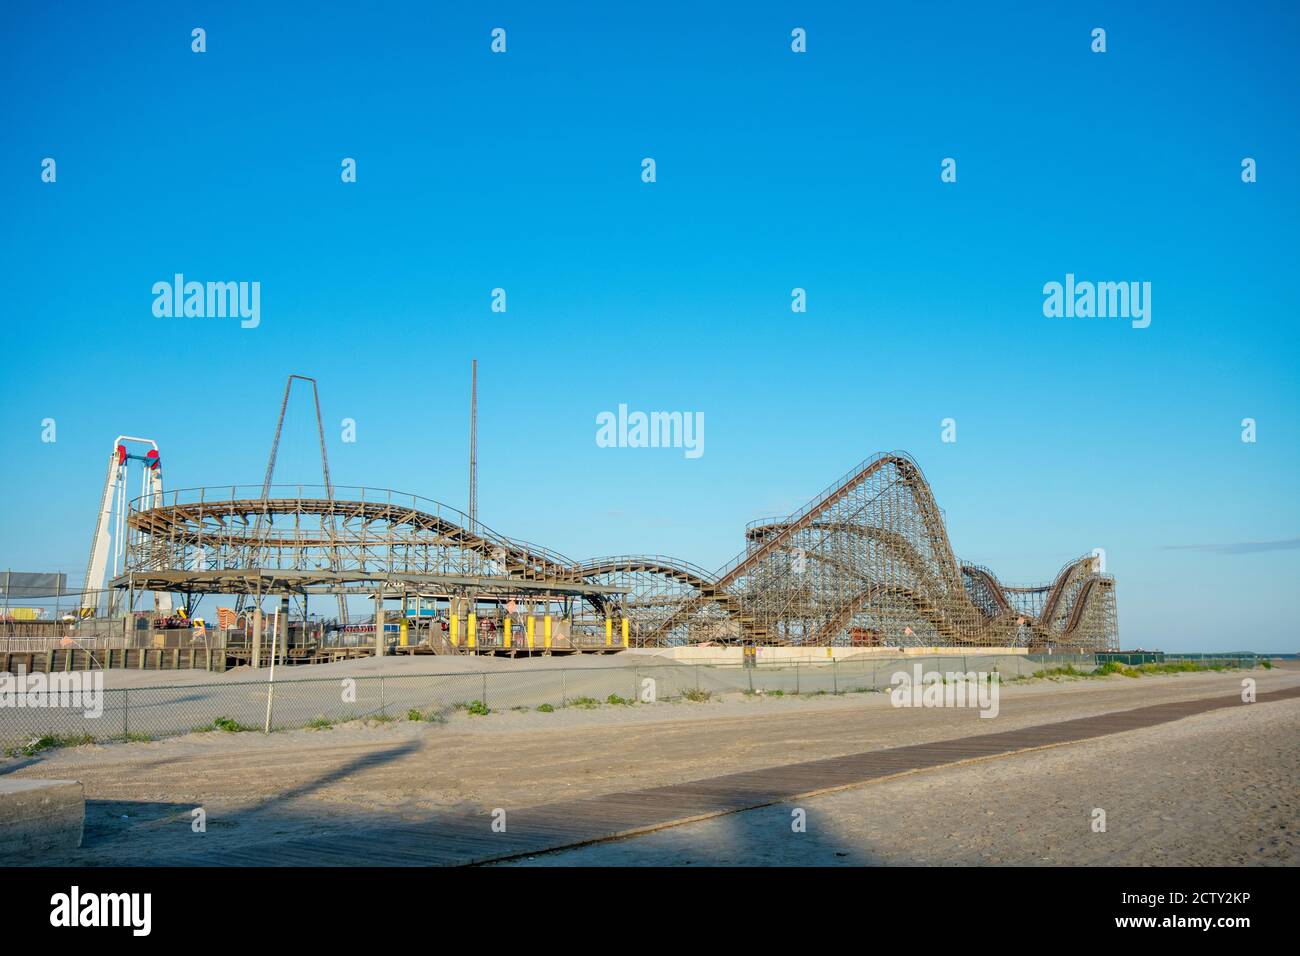 A Large Wooden Roller Coaster on a Pier at the Boardwalk in Wildwood New Jersey Stock Photo